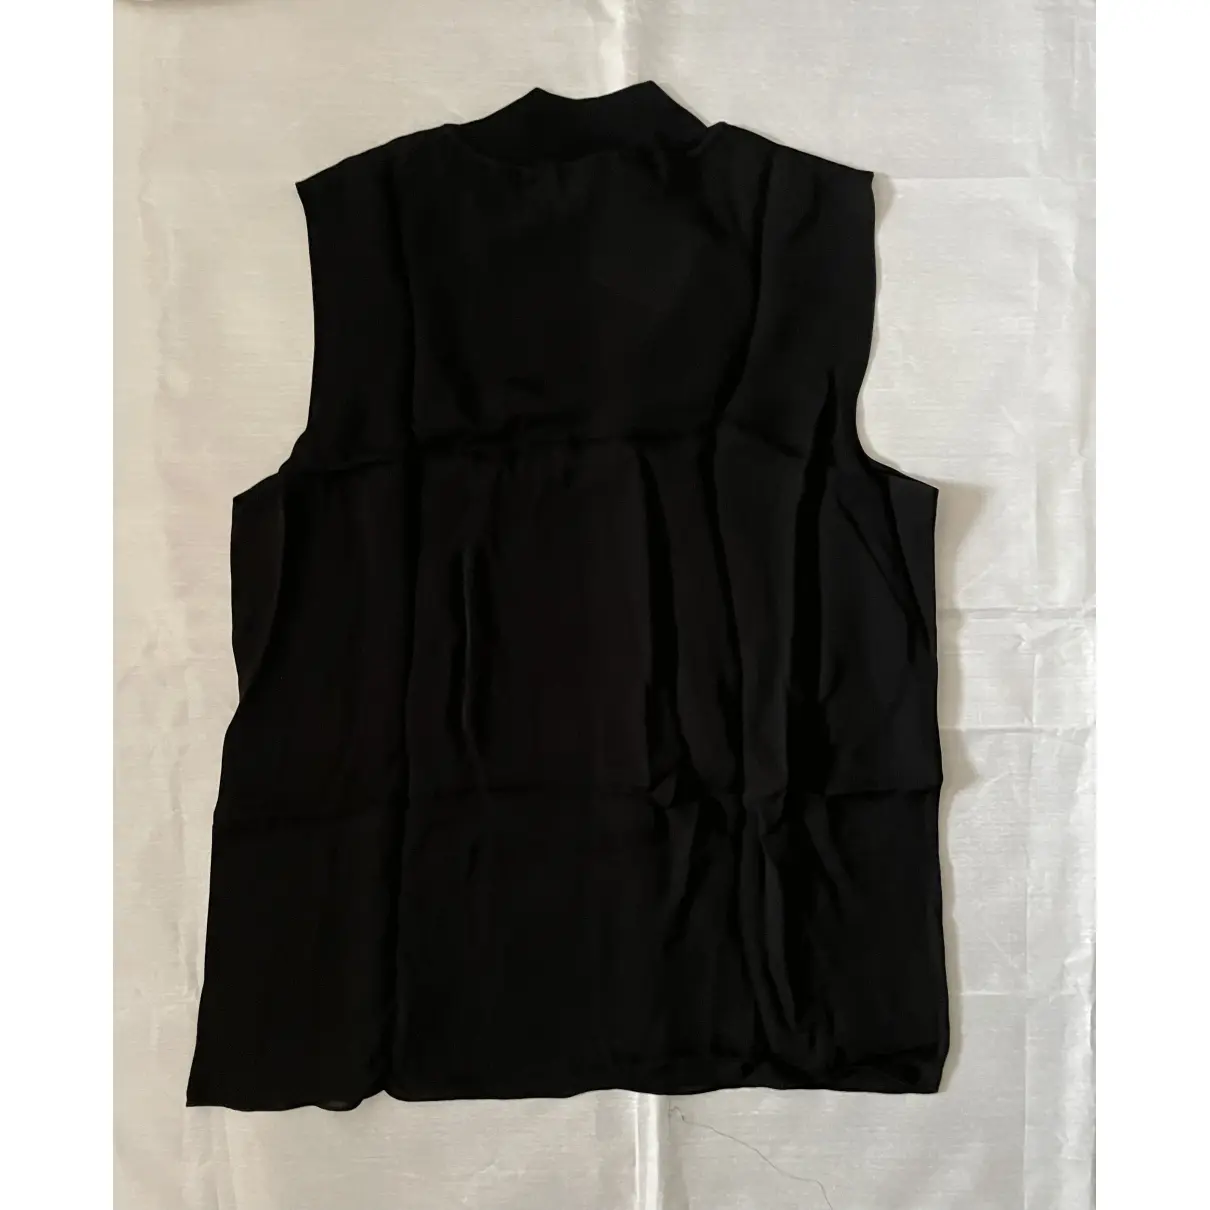 Buy Theory Silk camisole online